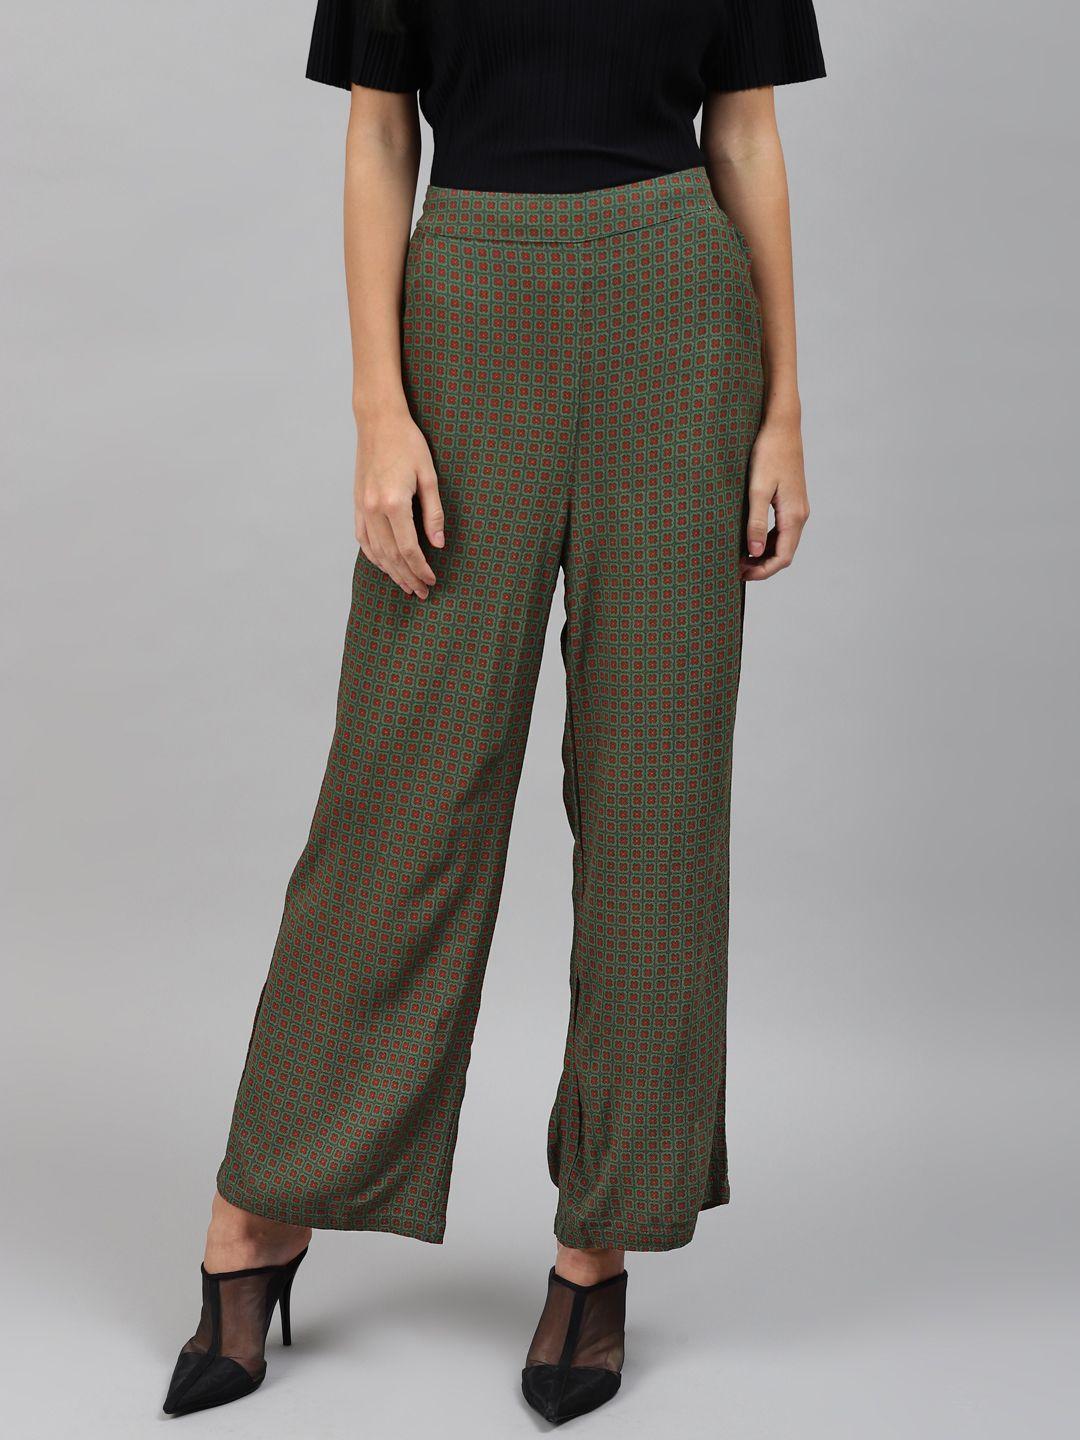 marks & spencer women green printed trousers